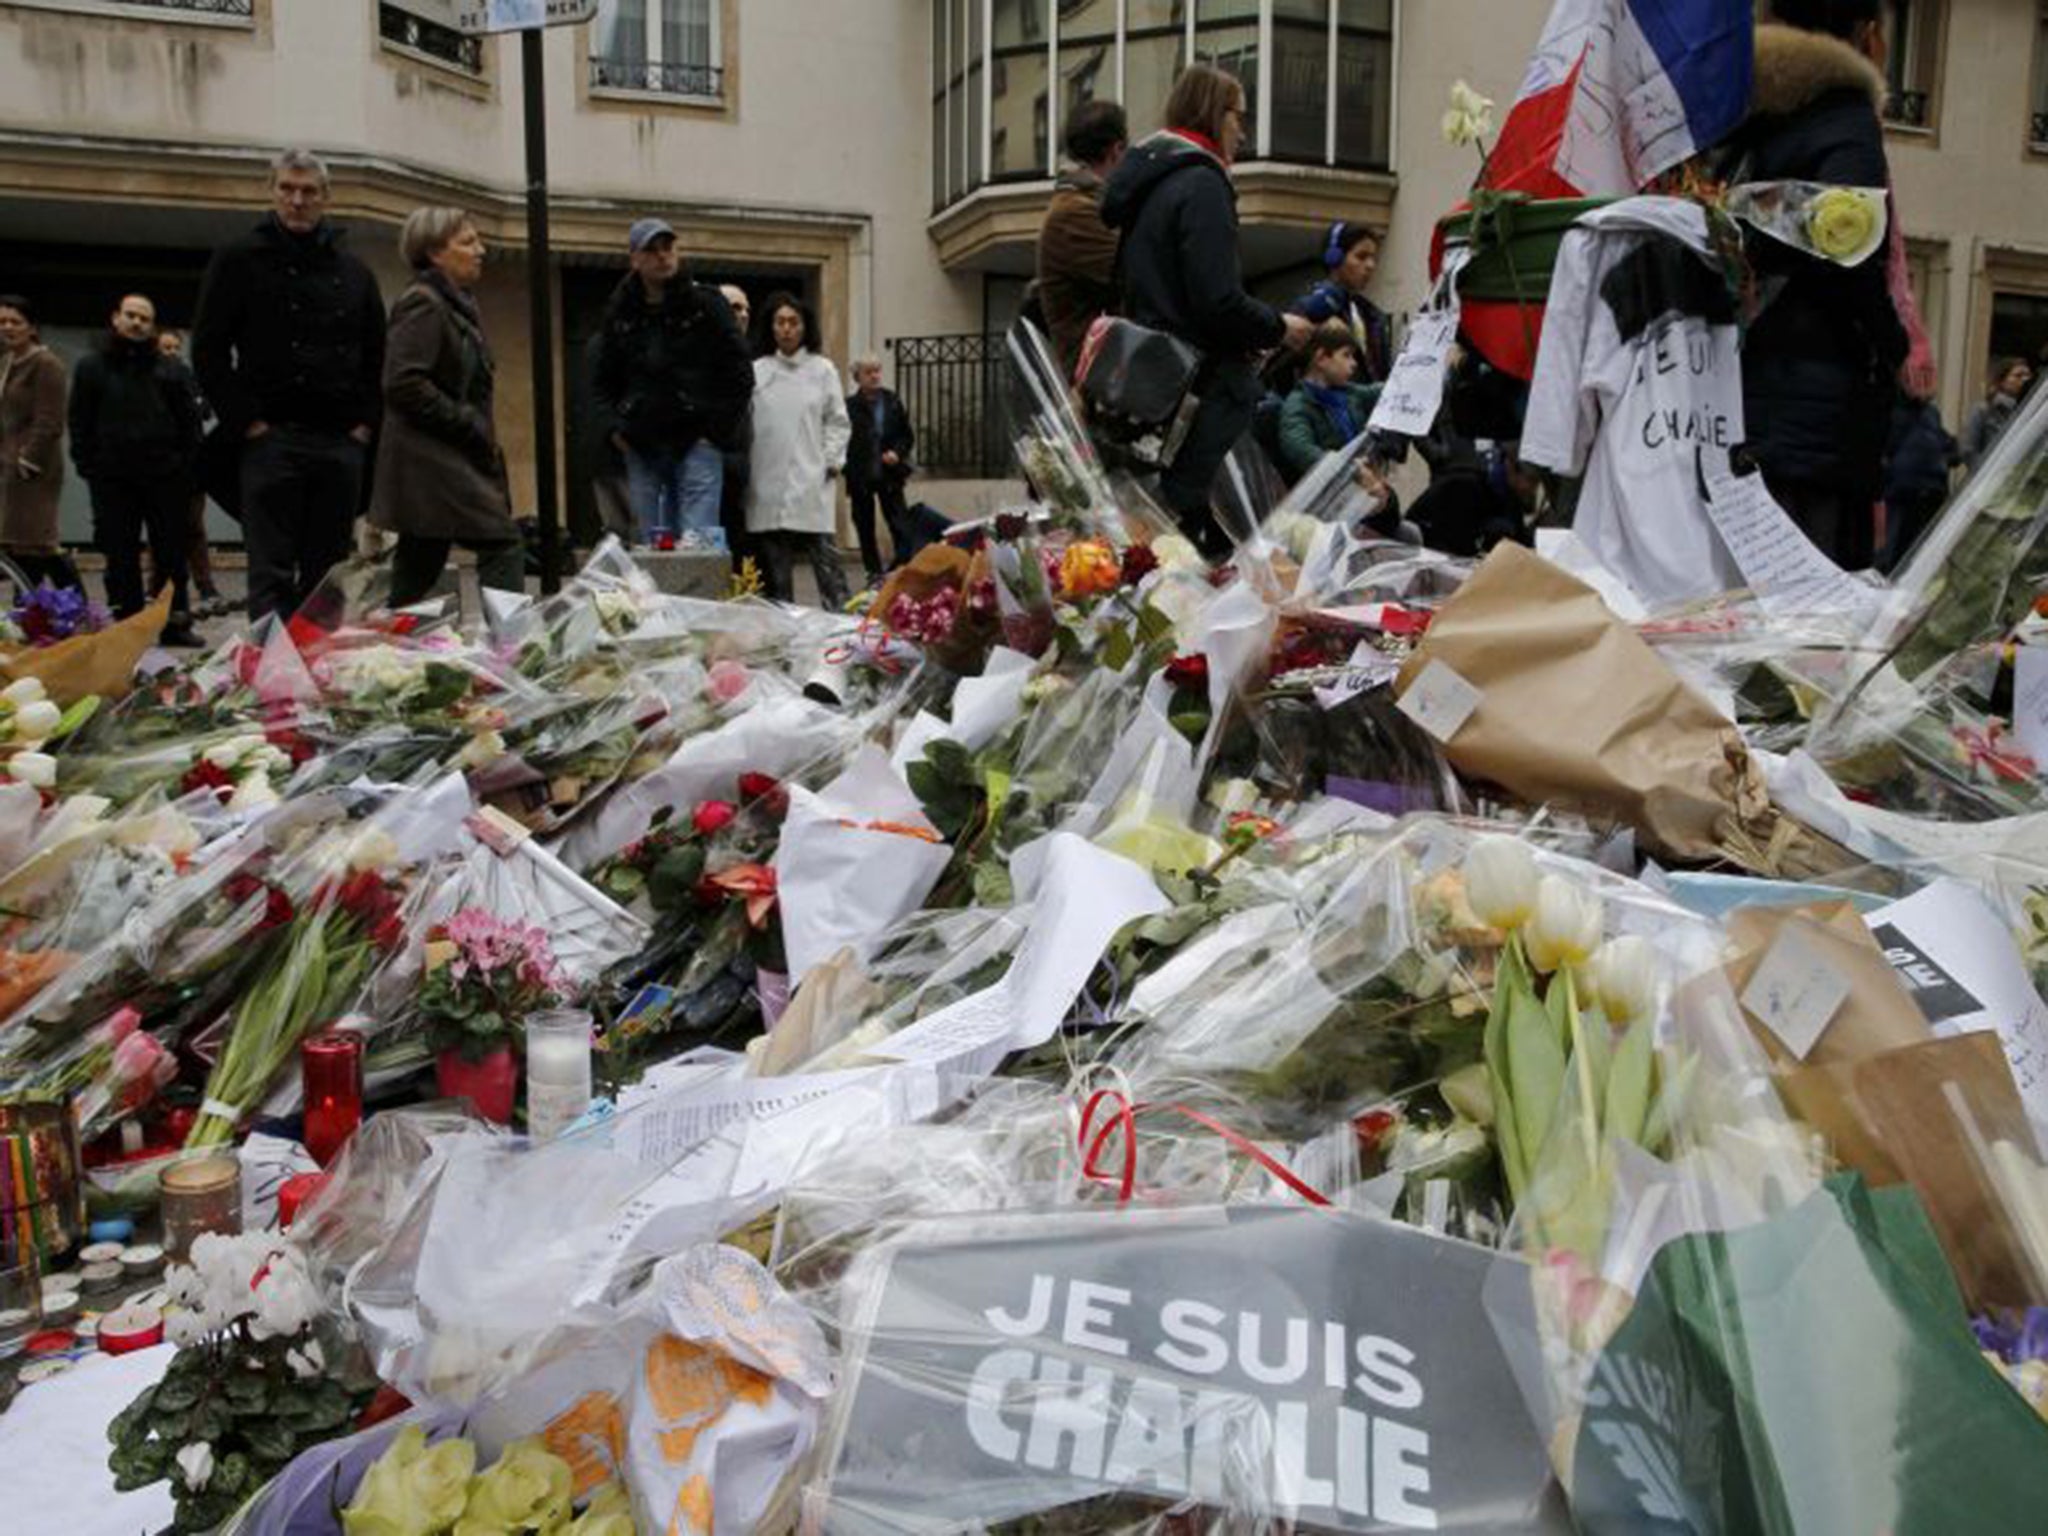 Flowers and messages lie in tribute in front of the offices of the weekly satirical newspaper Charlie Hebdo on Saturday (Reuters)